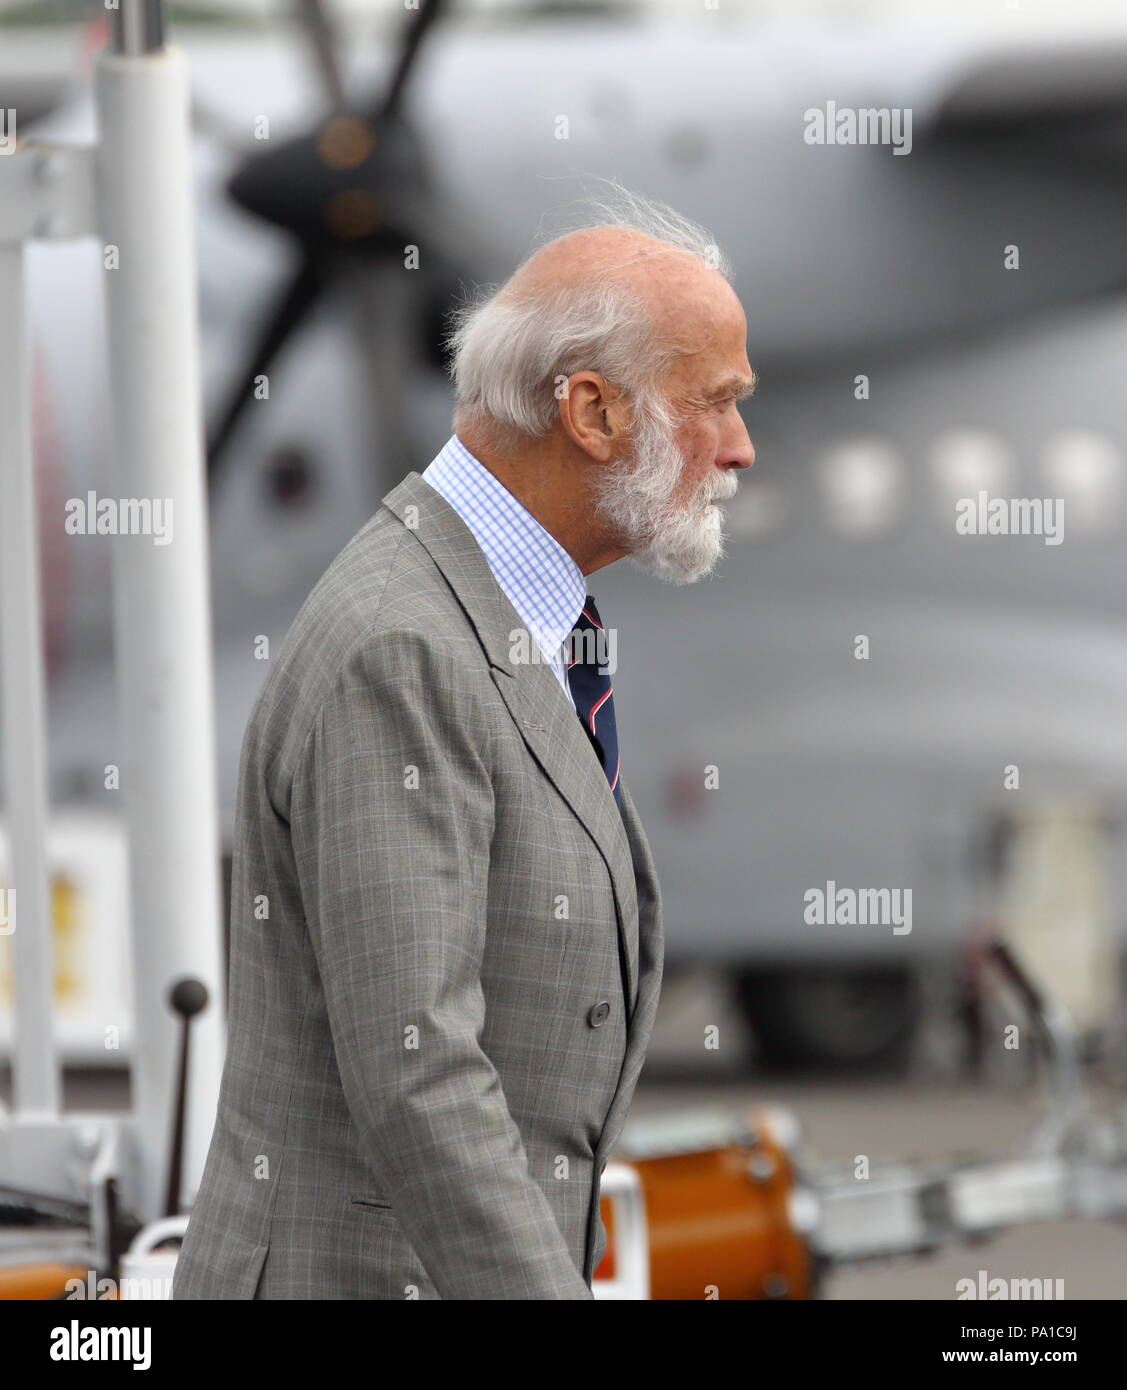 Farnborough, UK. 20th July 2018. Prince Michael of Kent inspected the latest Airbus A220-300 and an A380 in the 'Save the Coral Reefs' livery. He was accompanied by Vice Admiral Lord Sterling of Plaistow. Credit: Uwe Deffner/Alamy Live News Stock Photo